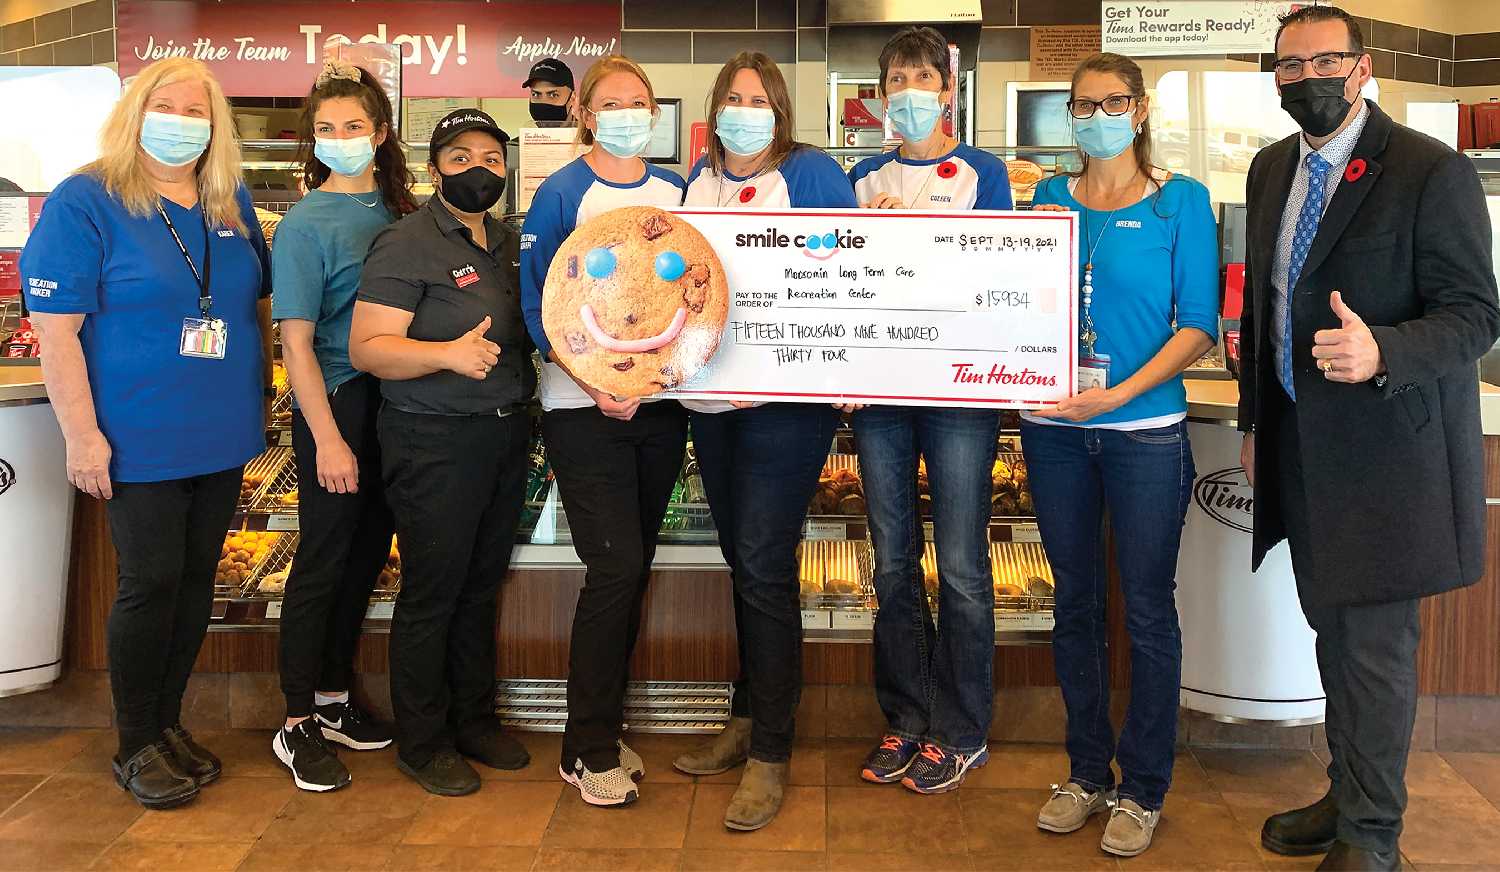 Tim Hortons Moosomin presented a cheque for $15,934 to Moosomin Long-Term care last week. The cheque represents the proceeds of the 2021 Smile Cookie campaign in Moosomin. It is a record amount raised in Moosomin, and in the top three in Saskatchewan for funds raised this year. At right is Greg Crisanti (Westman Tim Horton’s manager). From left are Karen Holloway (recreation worker), Jenna Grose (resident care coordinator), Cherrie Caliwag (Moosomin Tim Horton’s manager), Amber Szafron-Campbell (recreation worker), Sara Gustafson (recreation coordinator), Coleen Webb (recreation worker) and Br